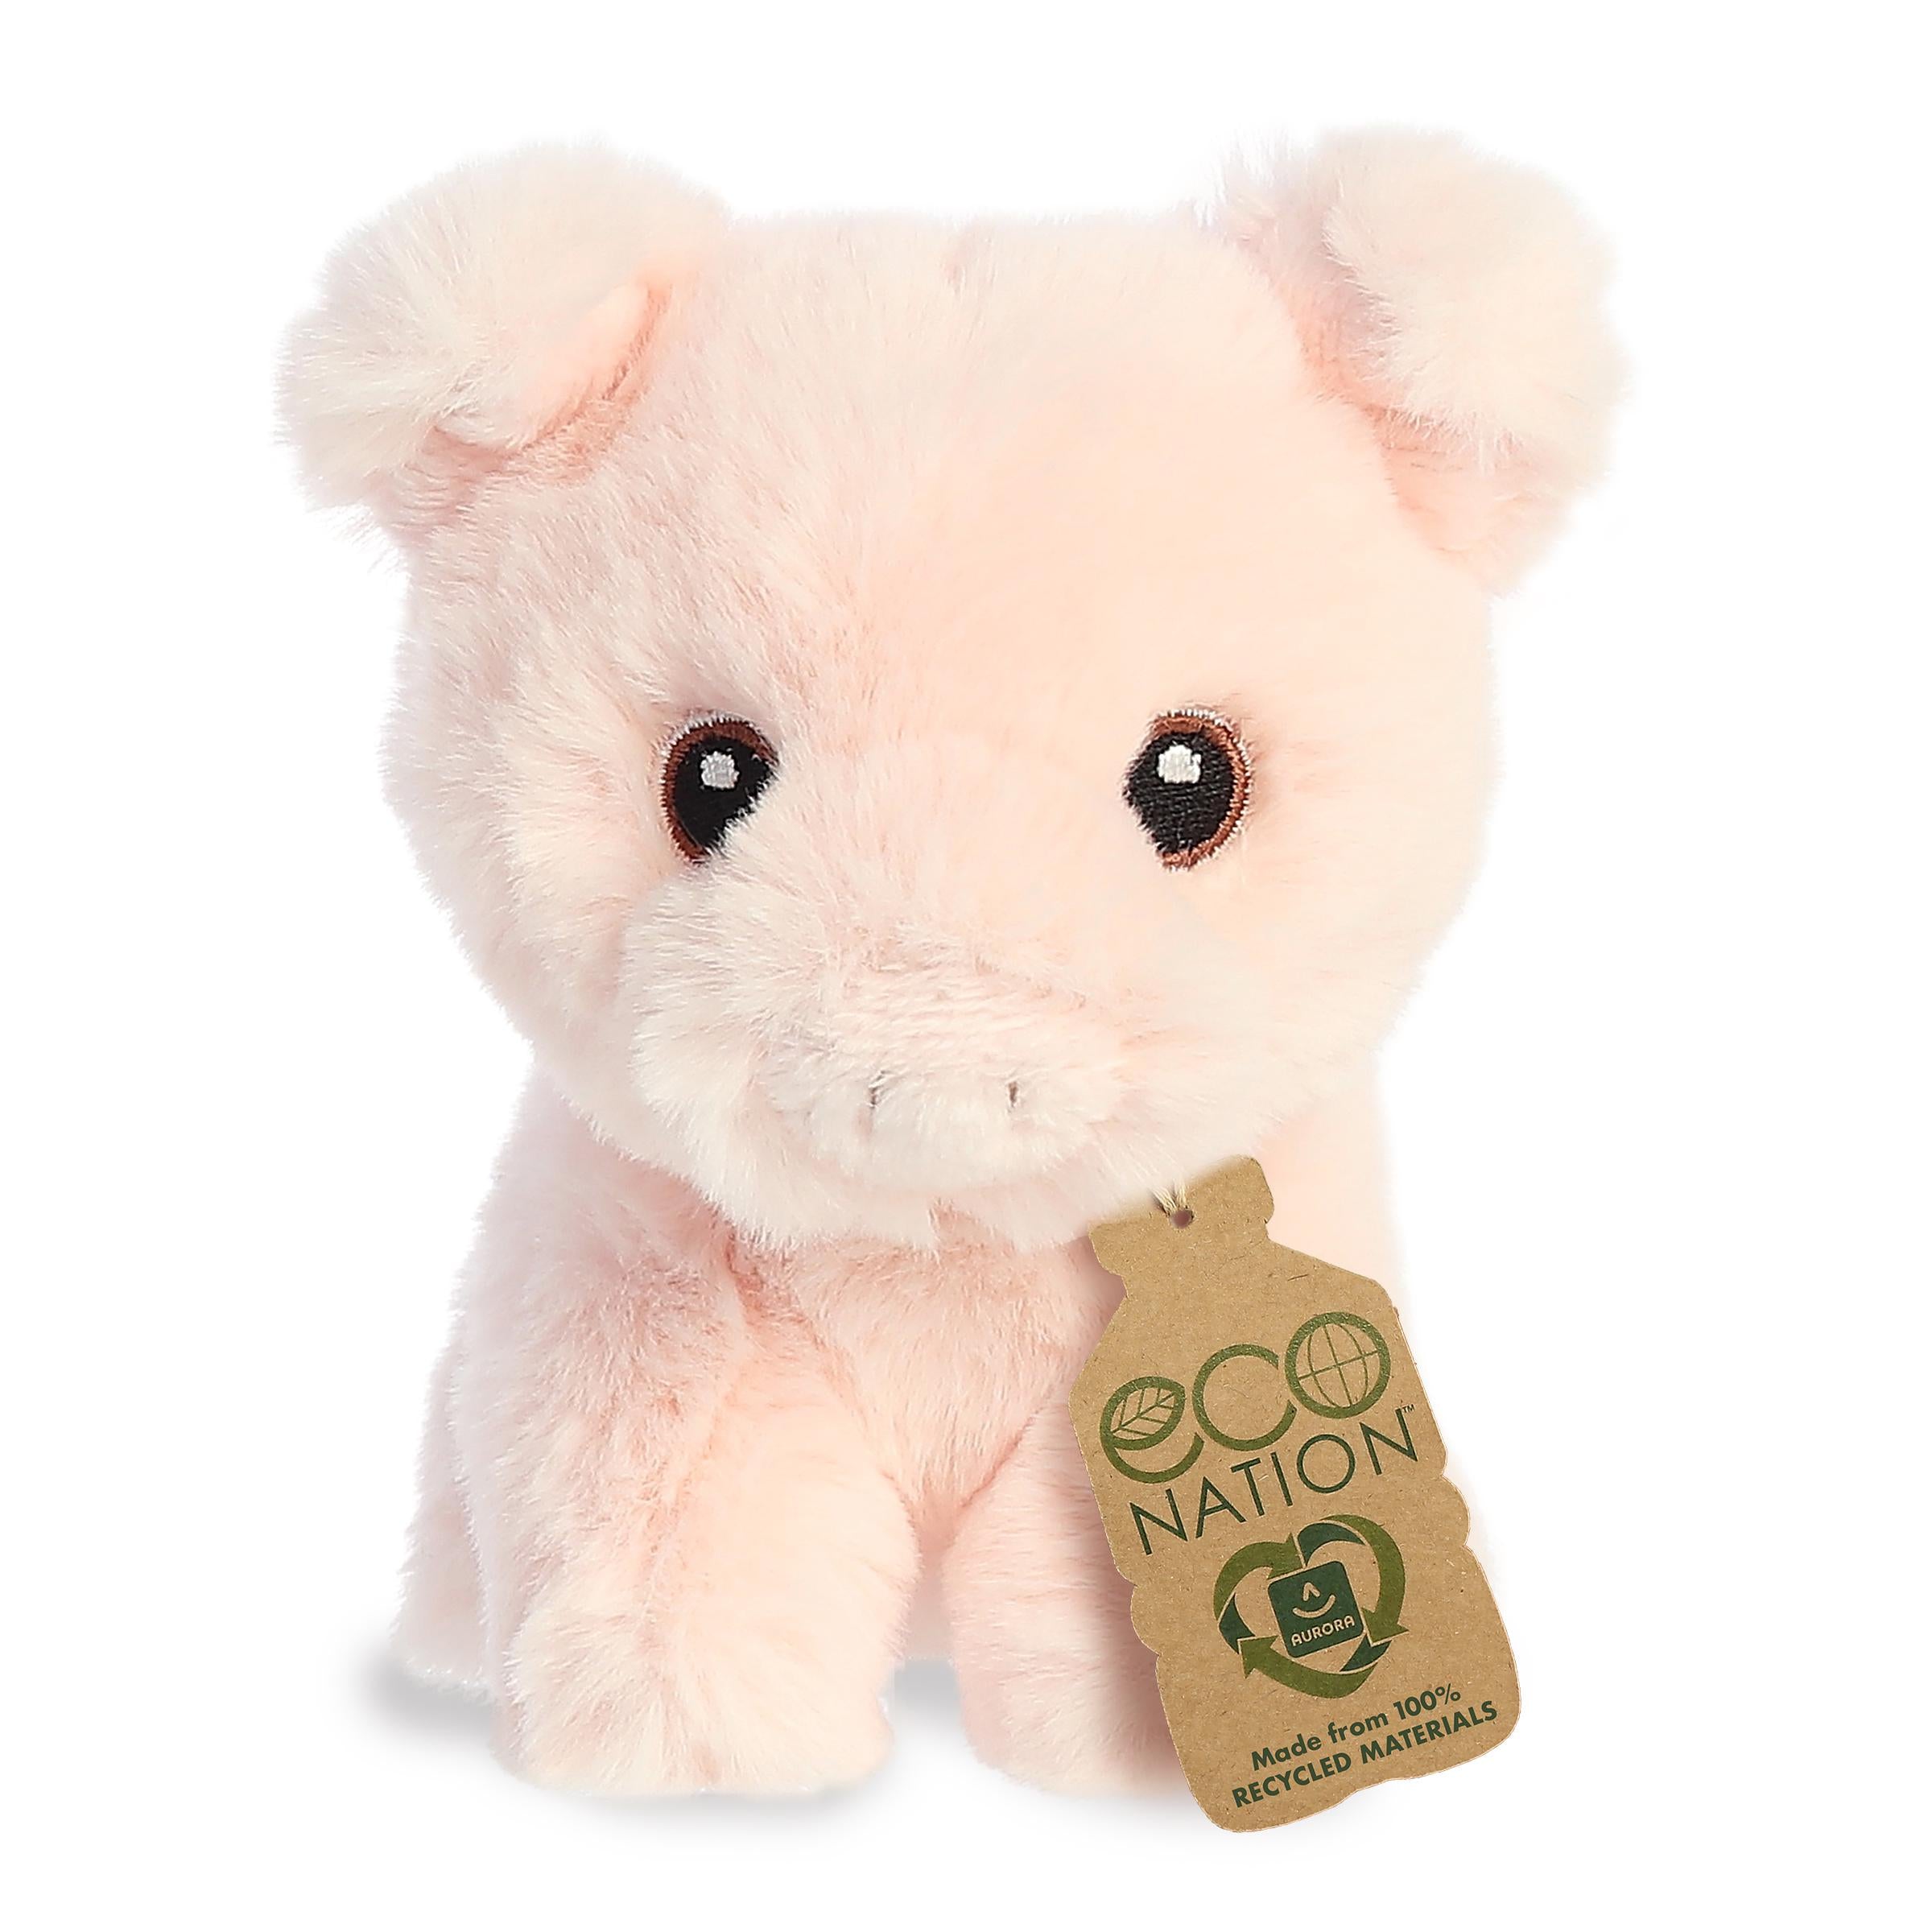 A sweet mini pig plush with a soft fluffy pink coat, delicately embroidered eyes, and a novelty eco-nation tag by its neck